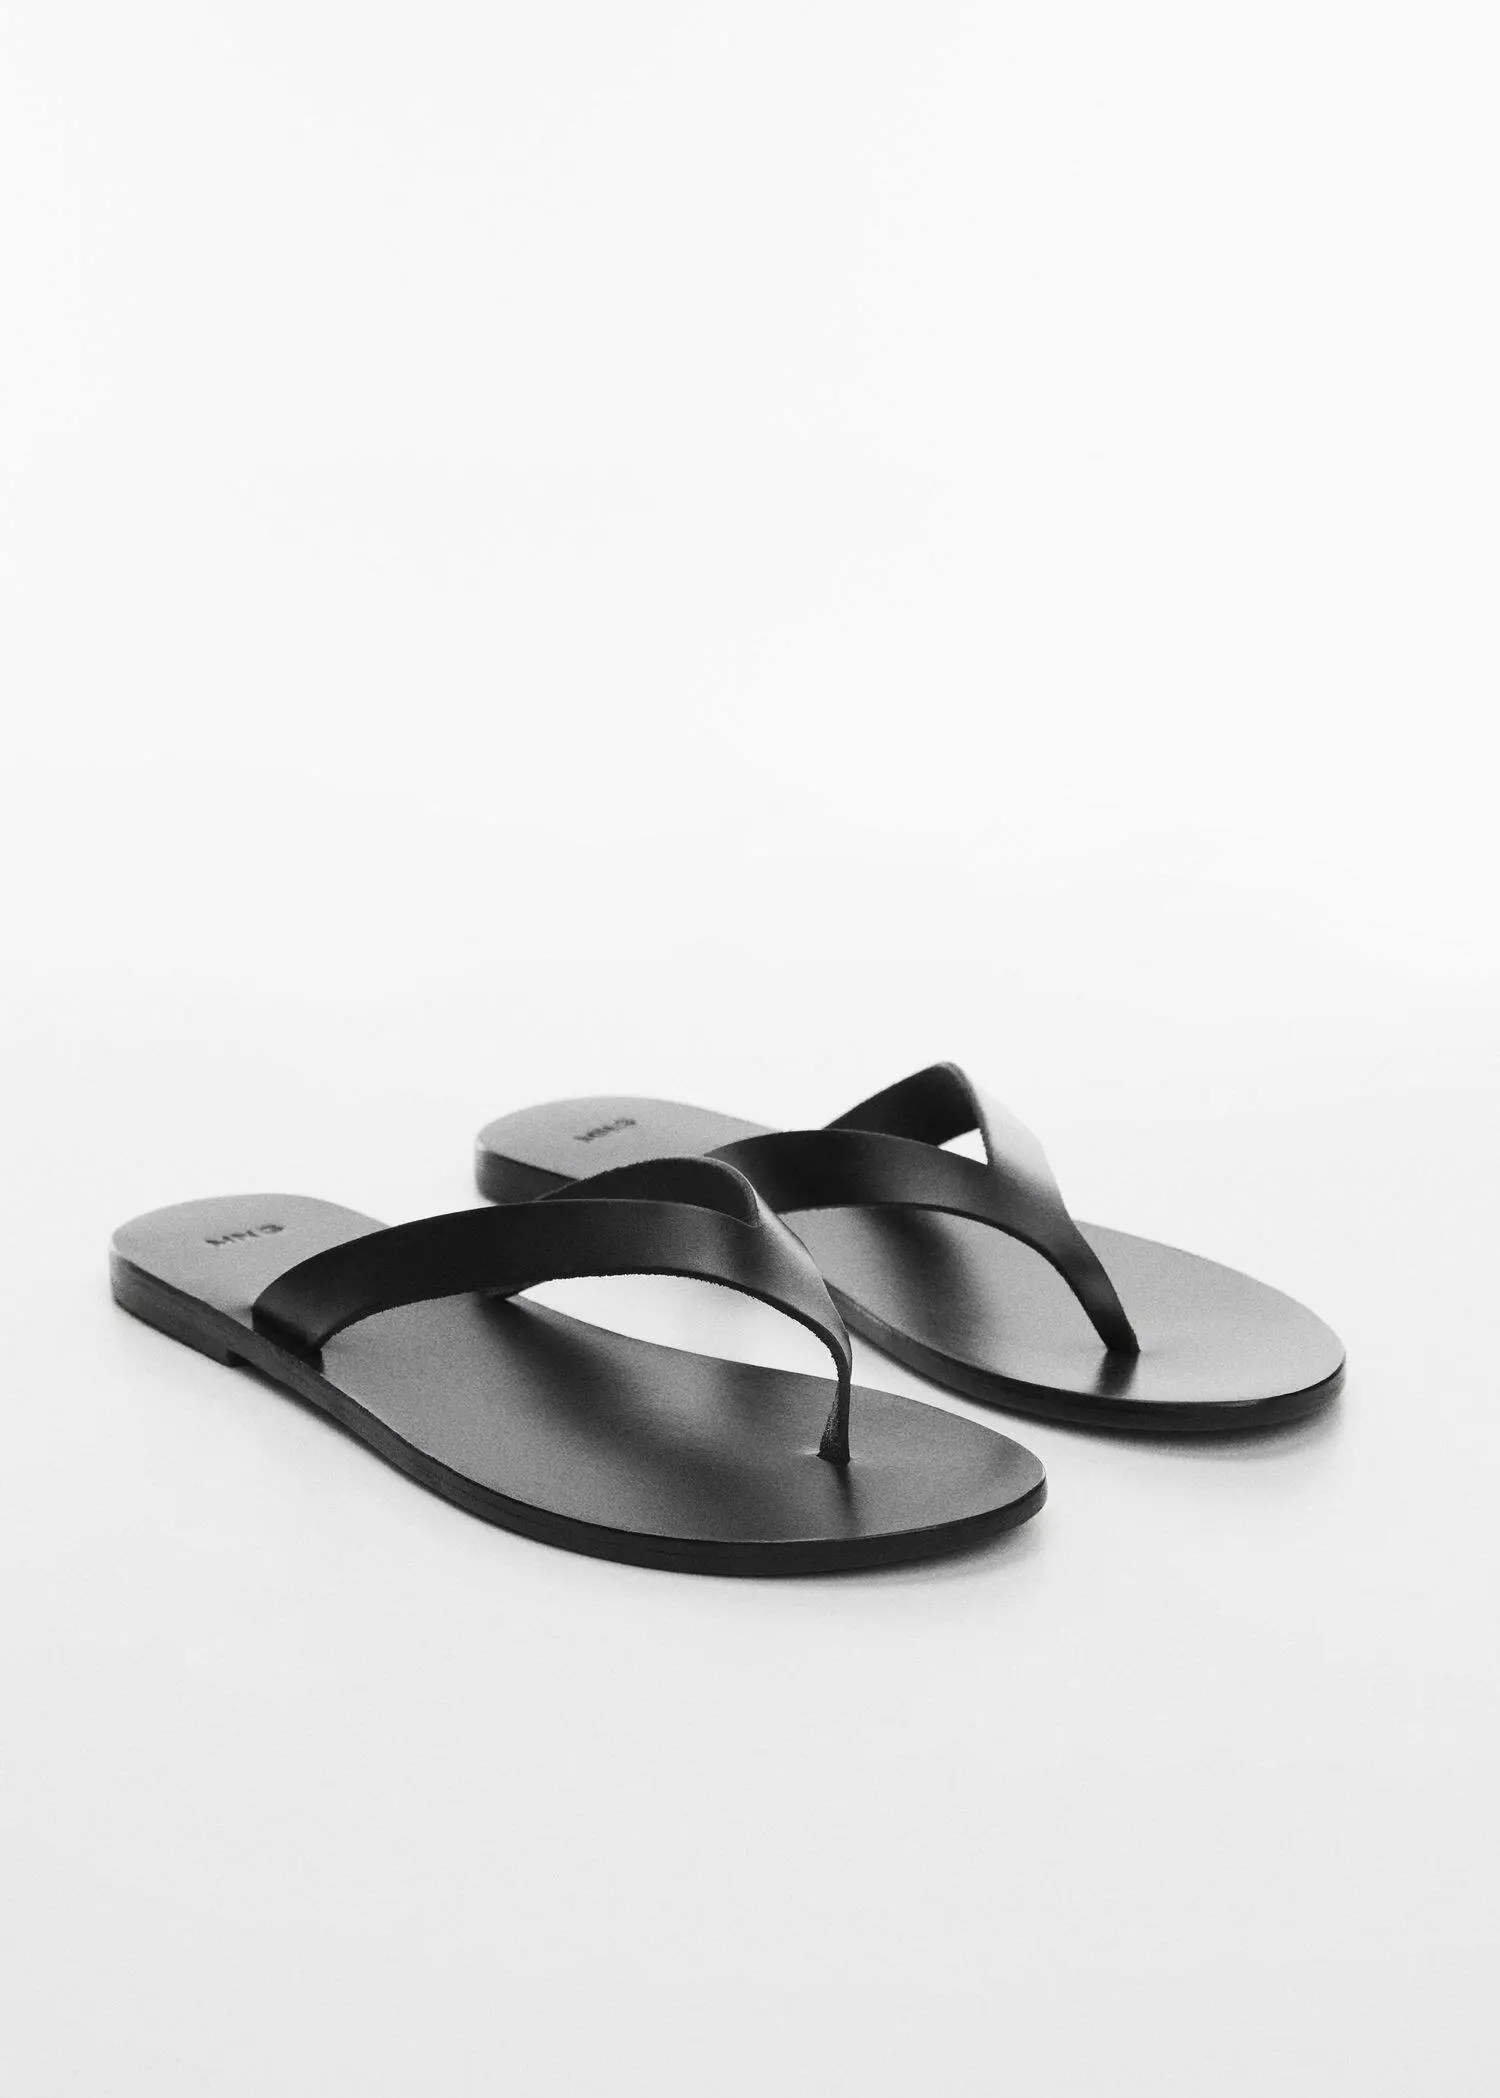 Mango Leather sandals with straps. a pair of black flip flops sitting on top of a table. 